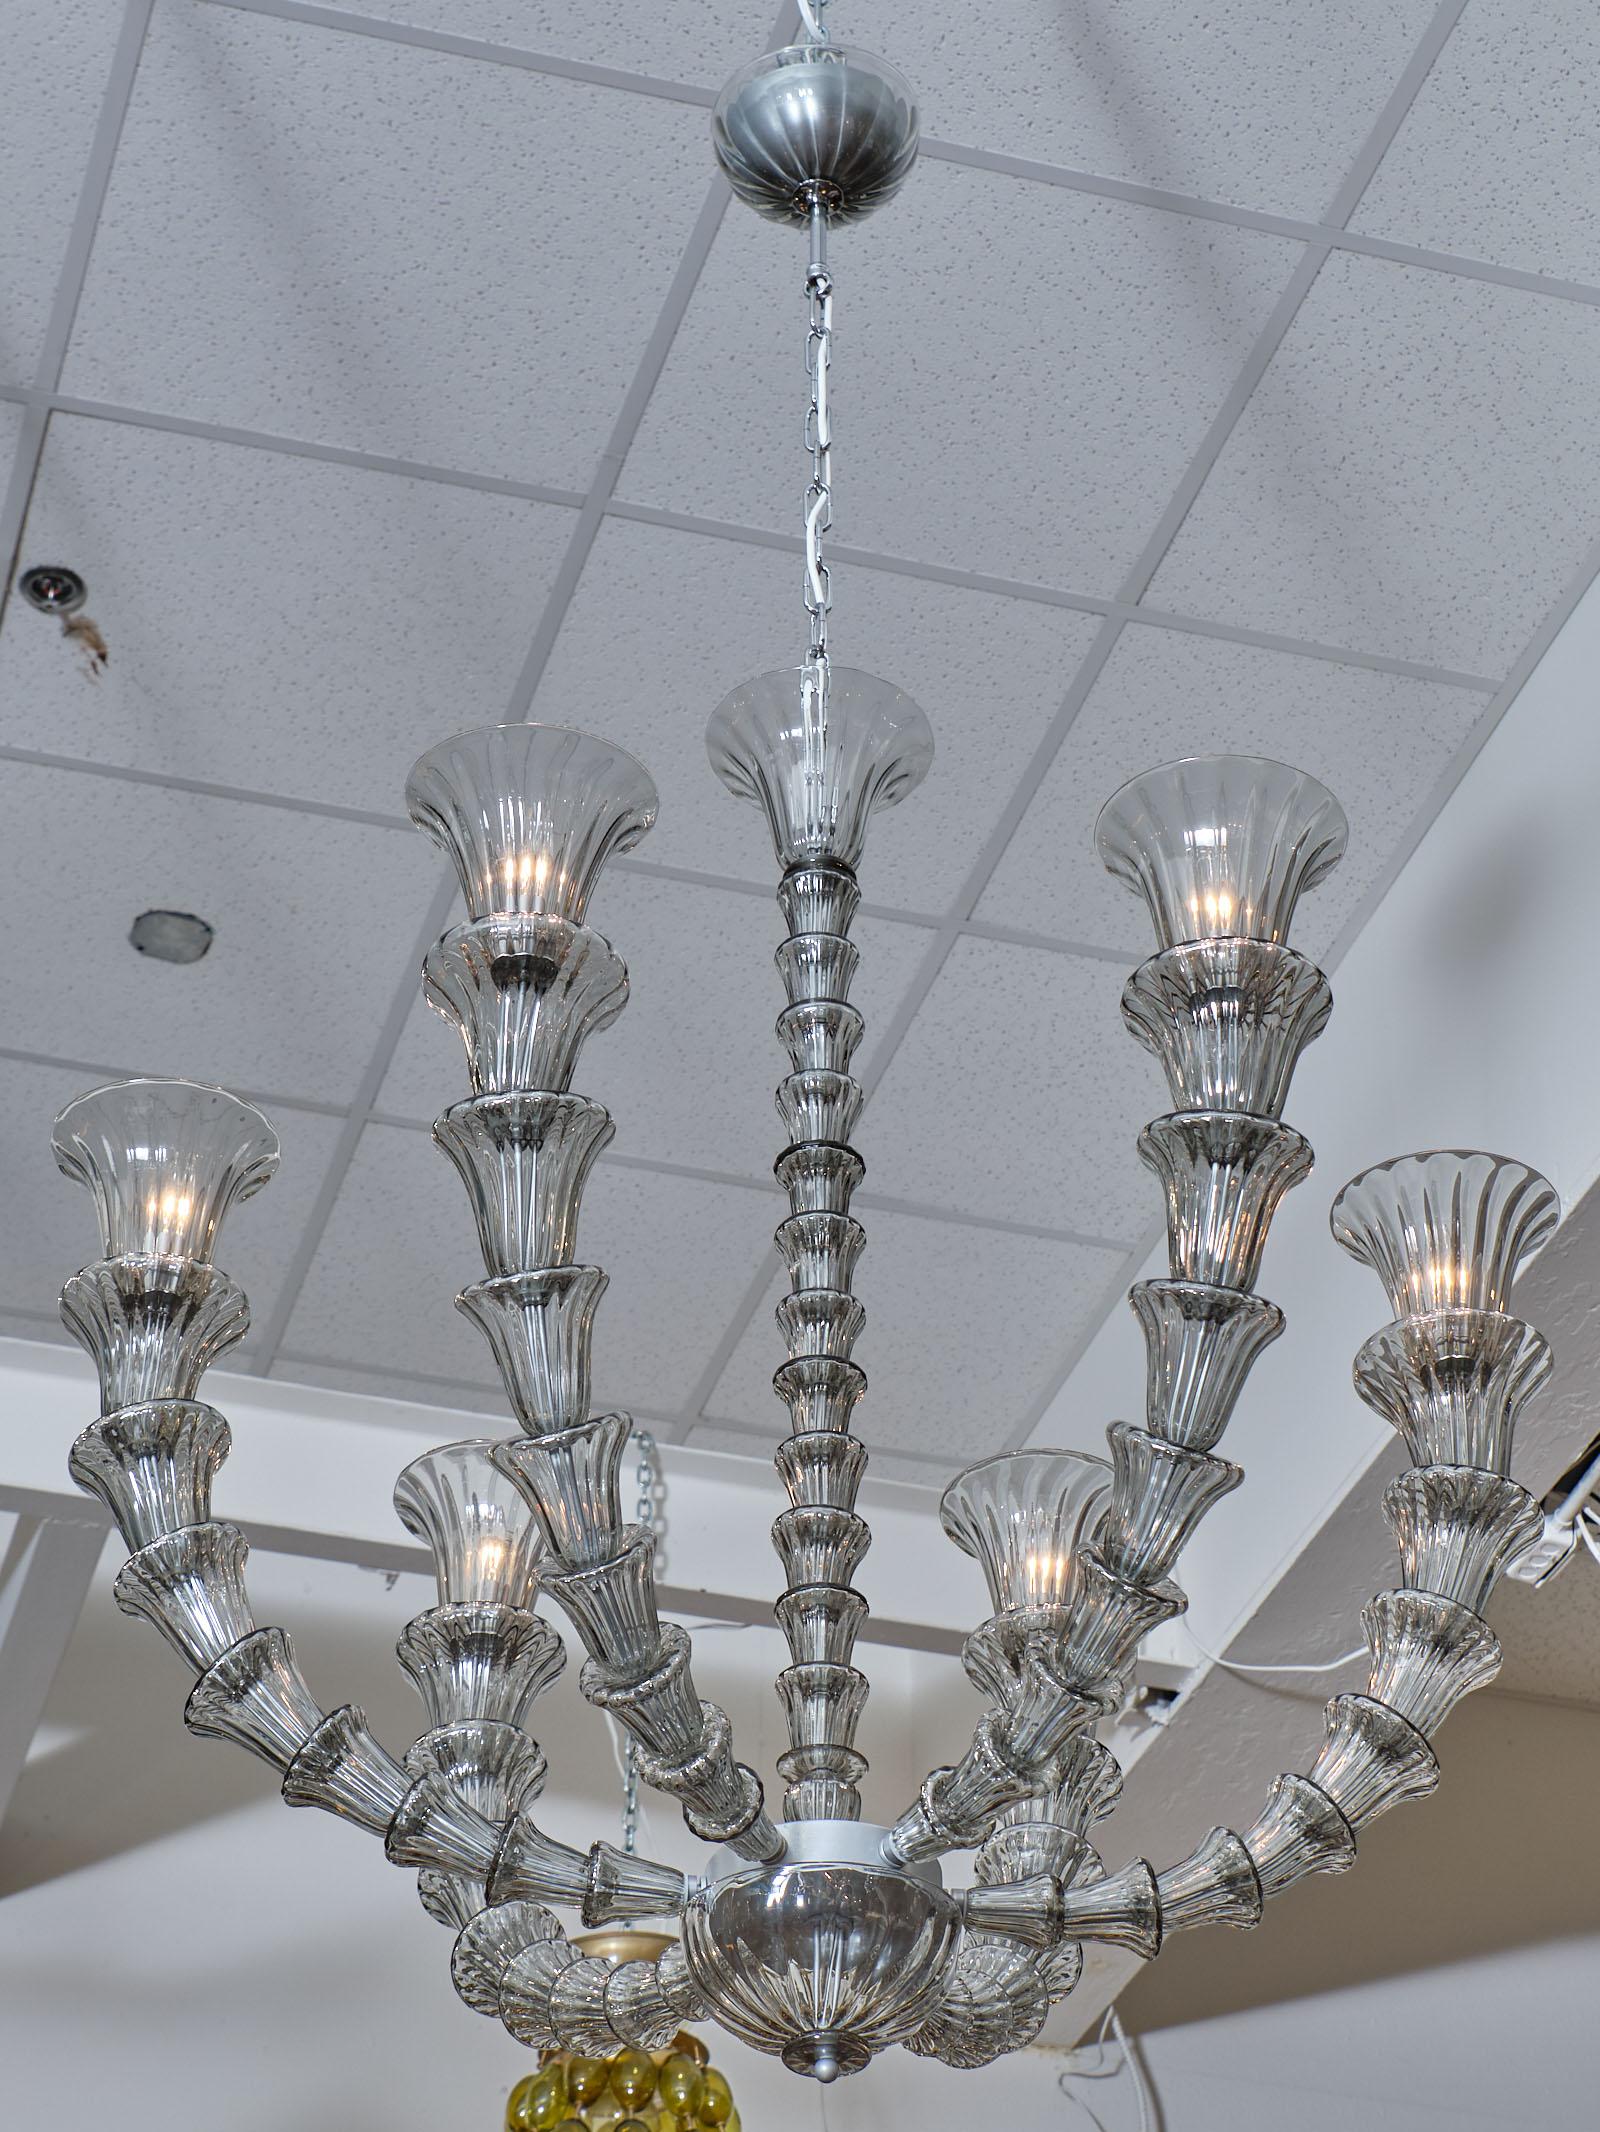 Murano Glass Rezzonico chandelier in the manner of René Lalique. The beautiful hand blown glass is in a striking gray color and has been newly wired to fit US standards. The current height from the ceiling is 64